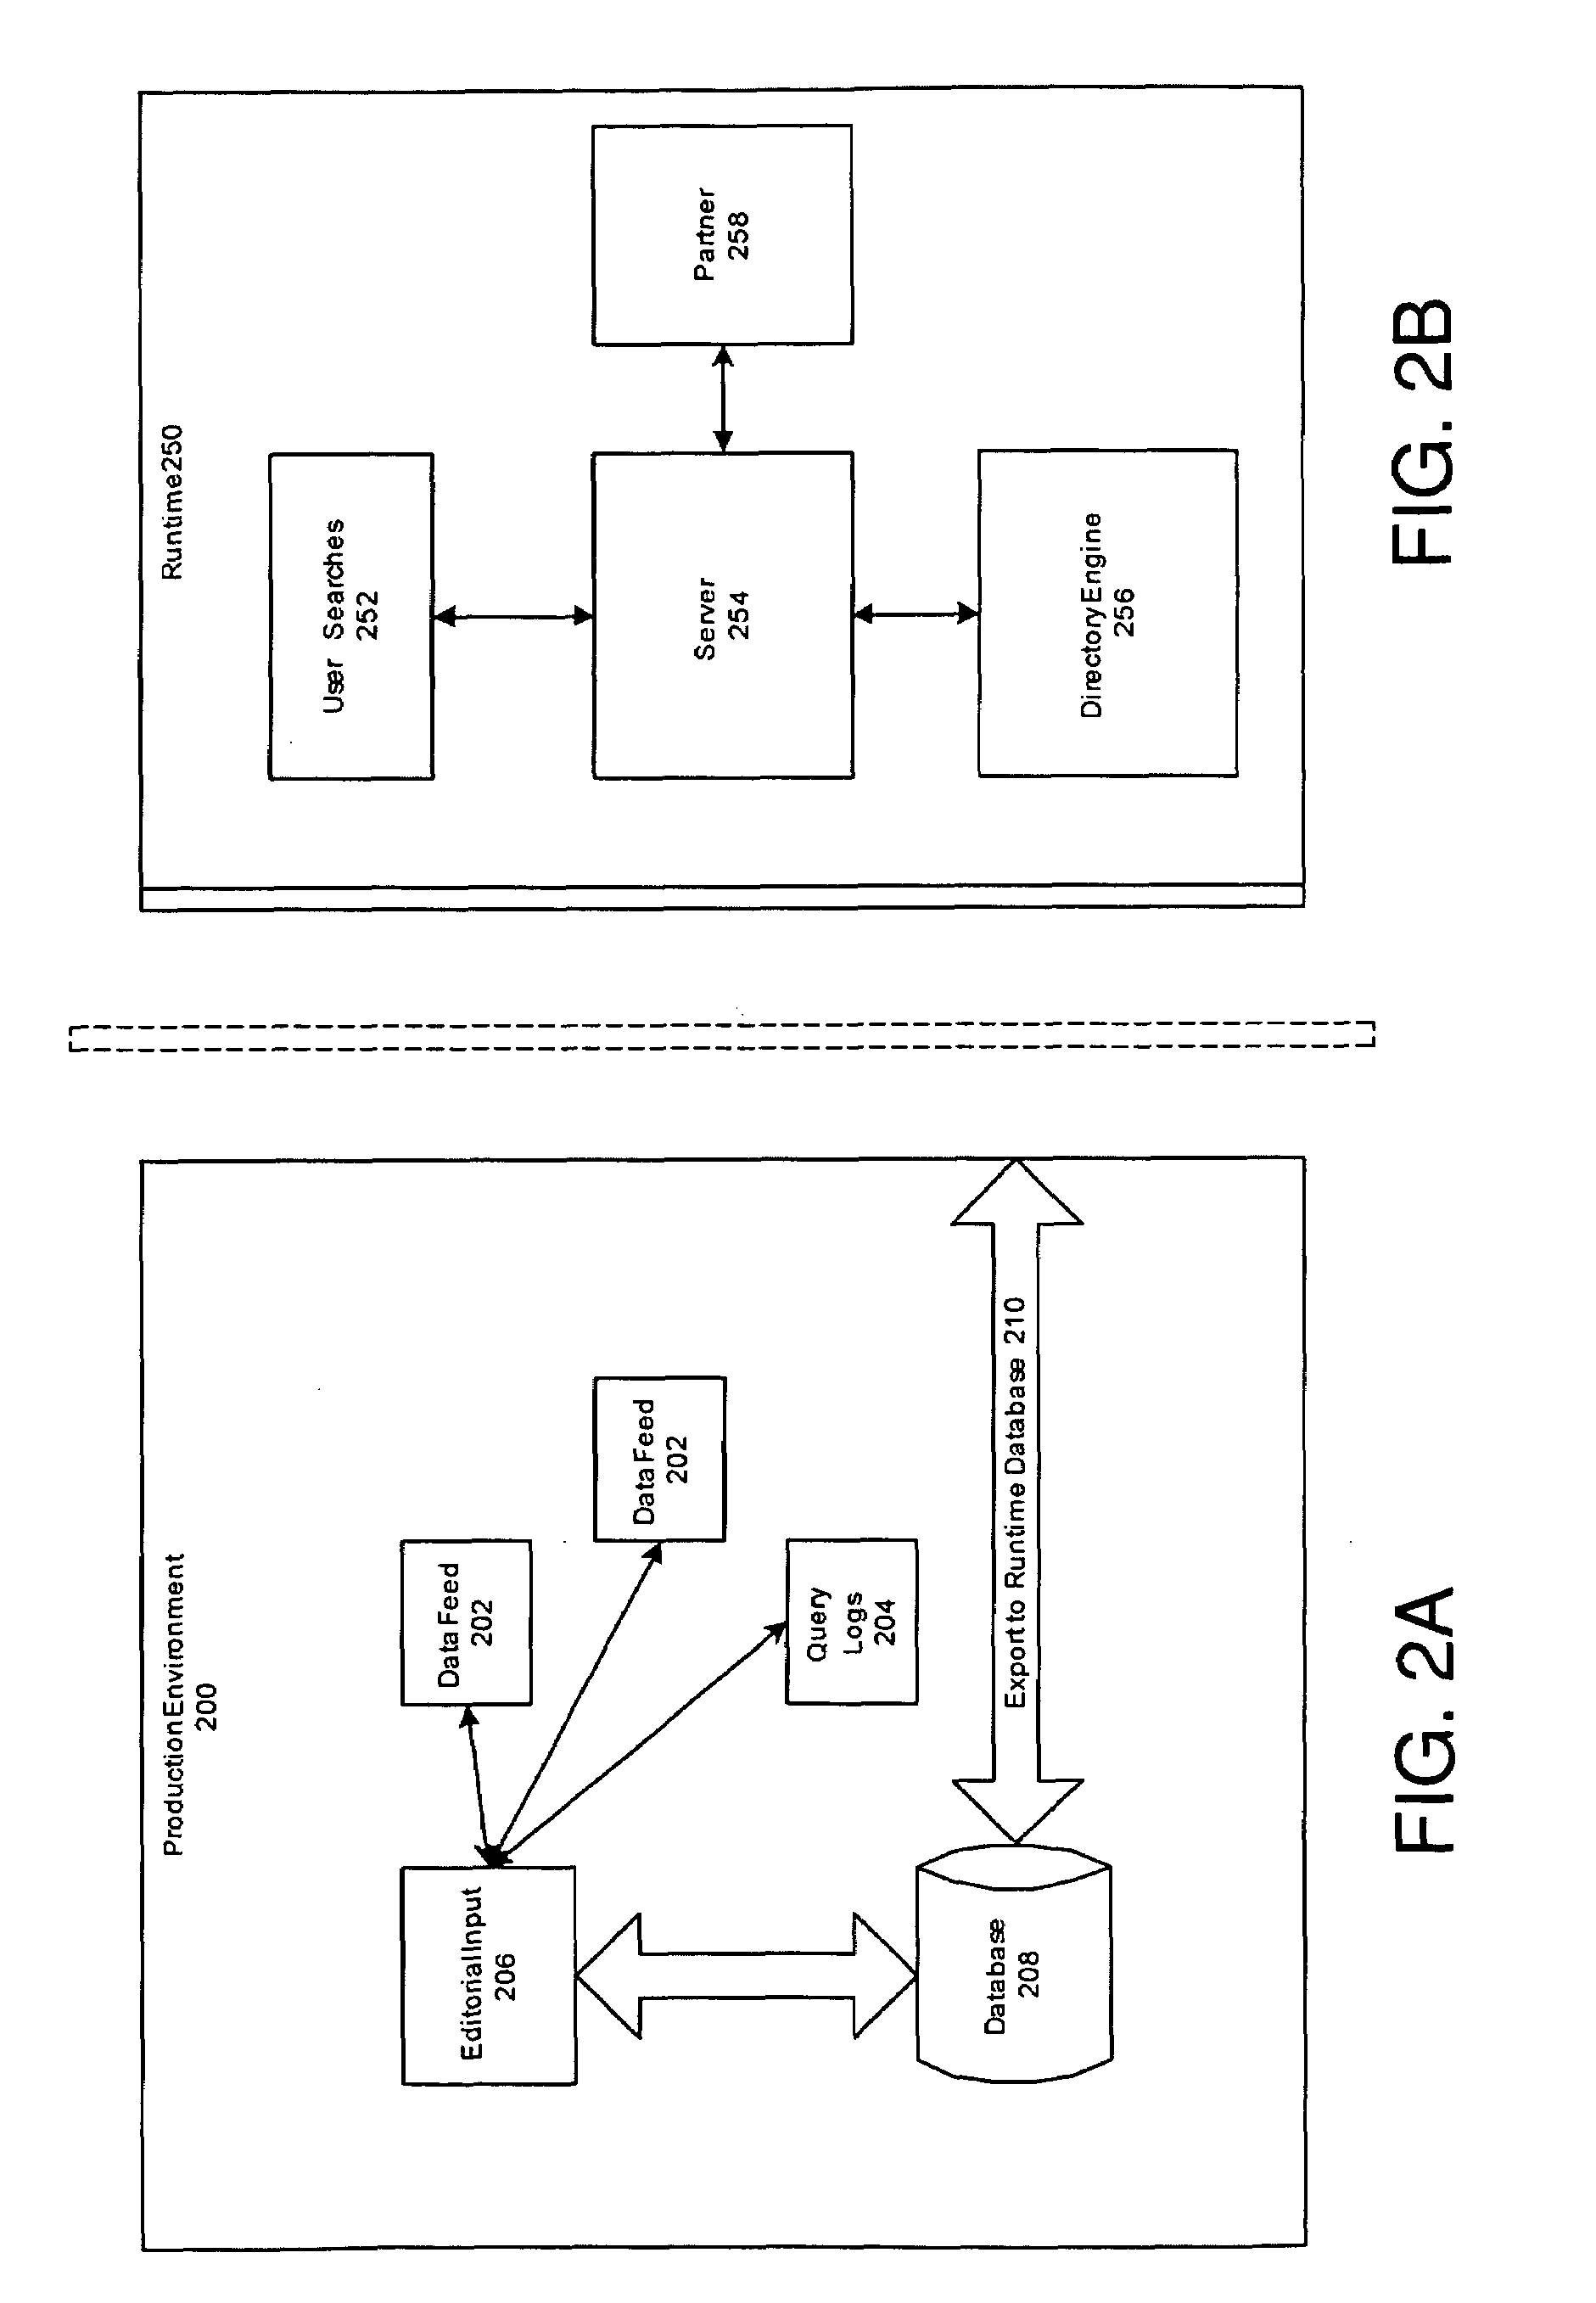 System and method for federated searching